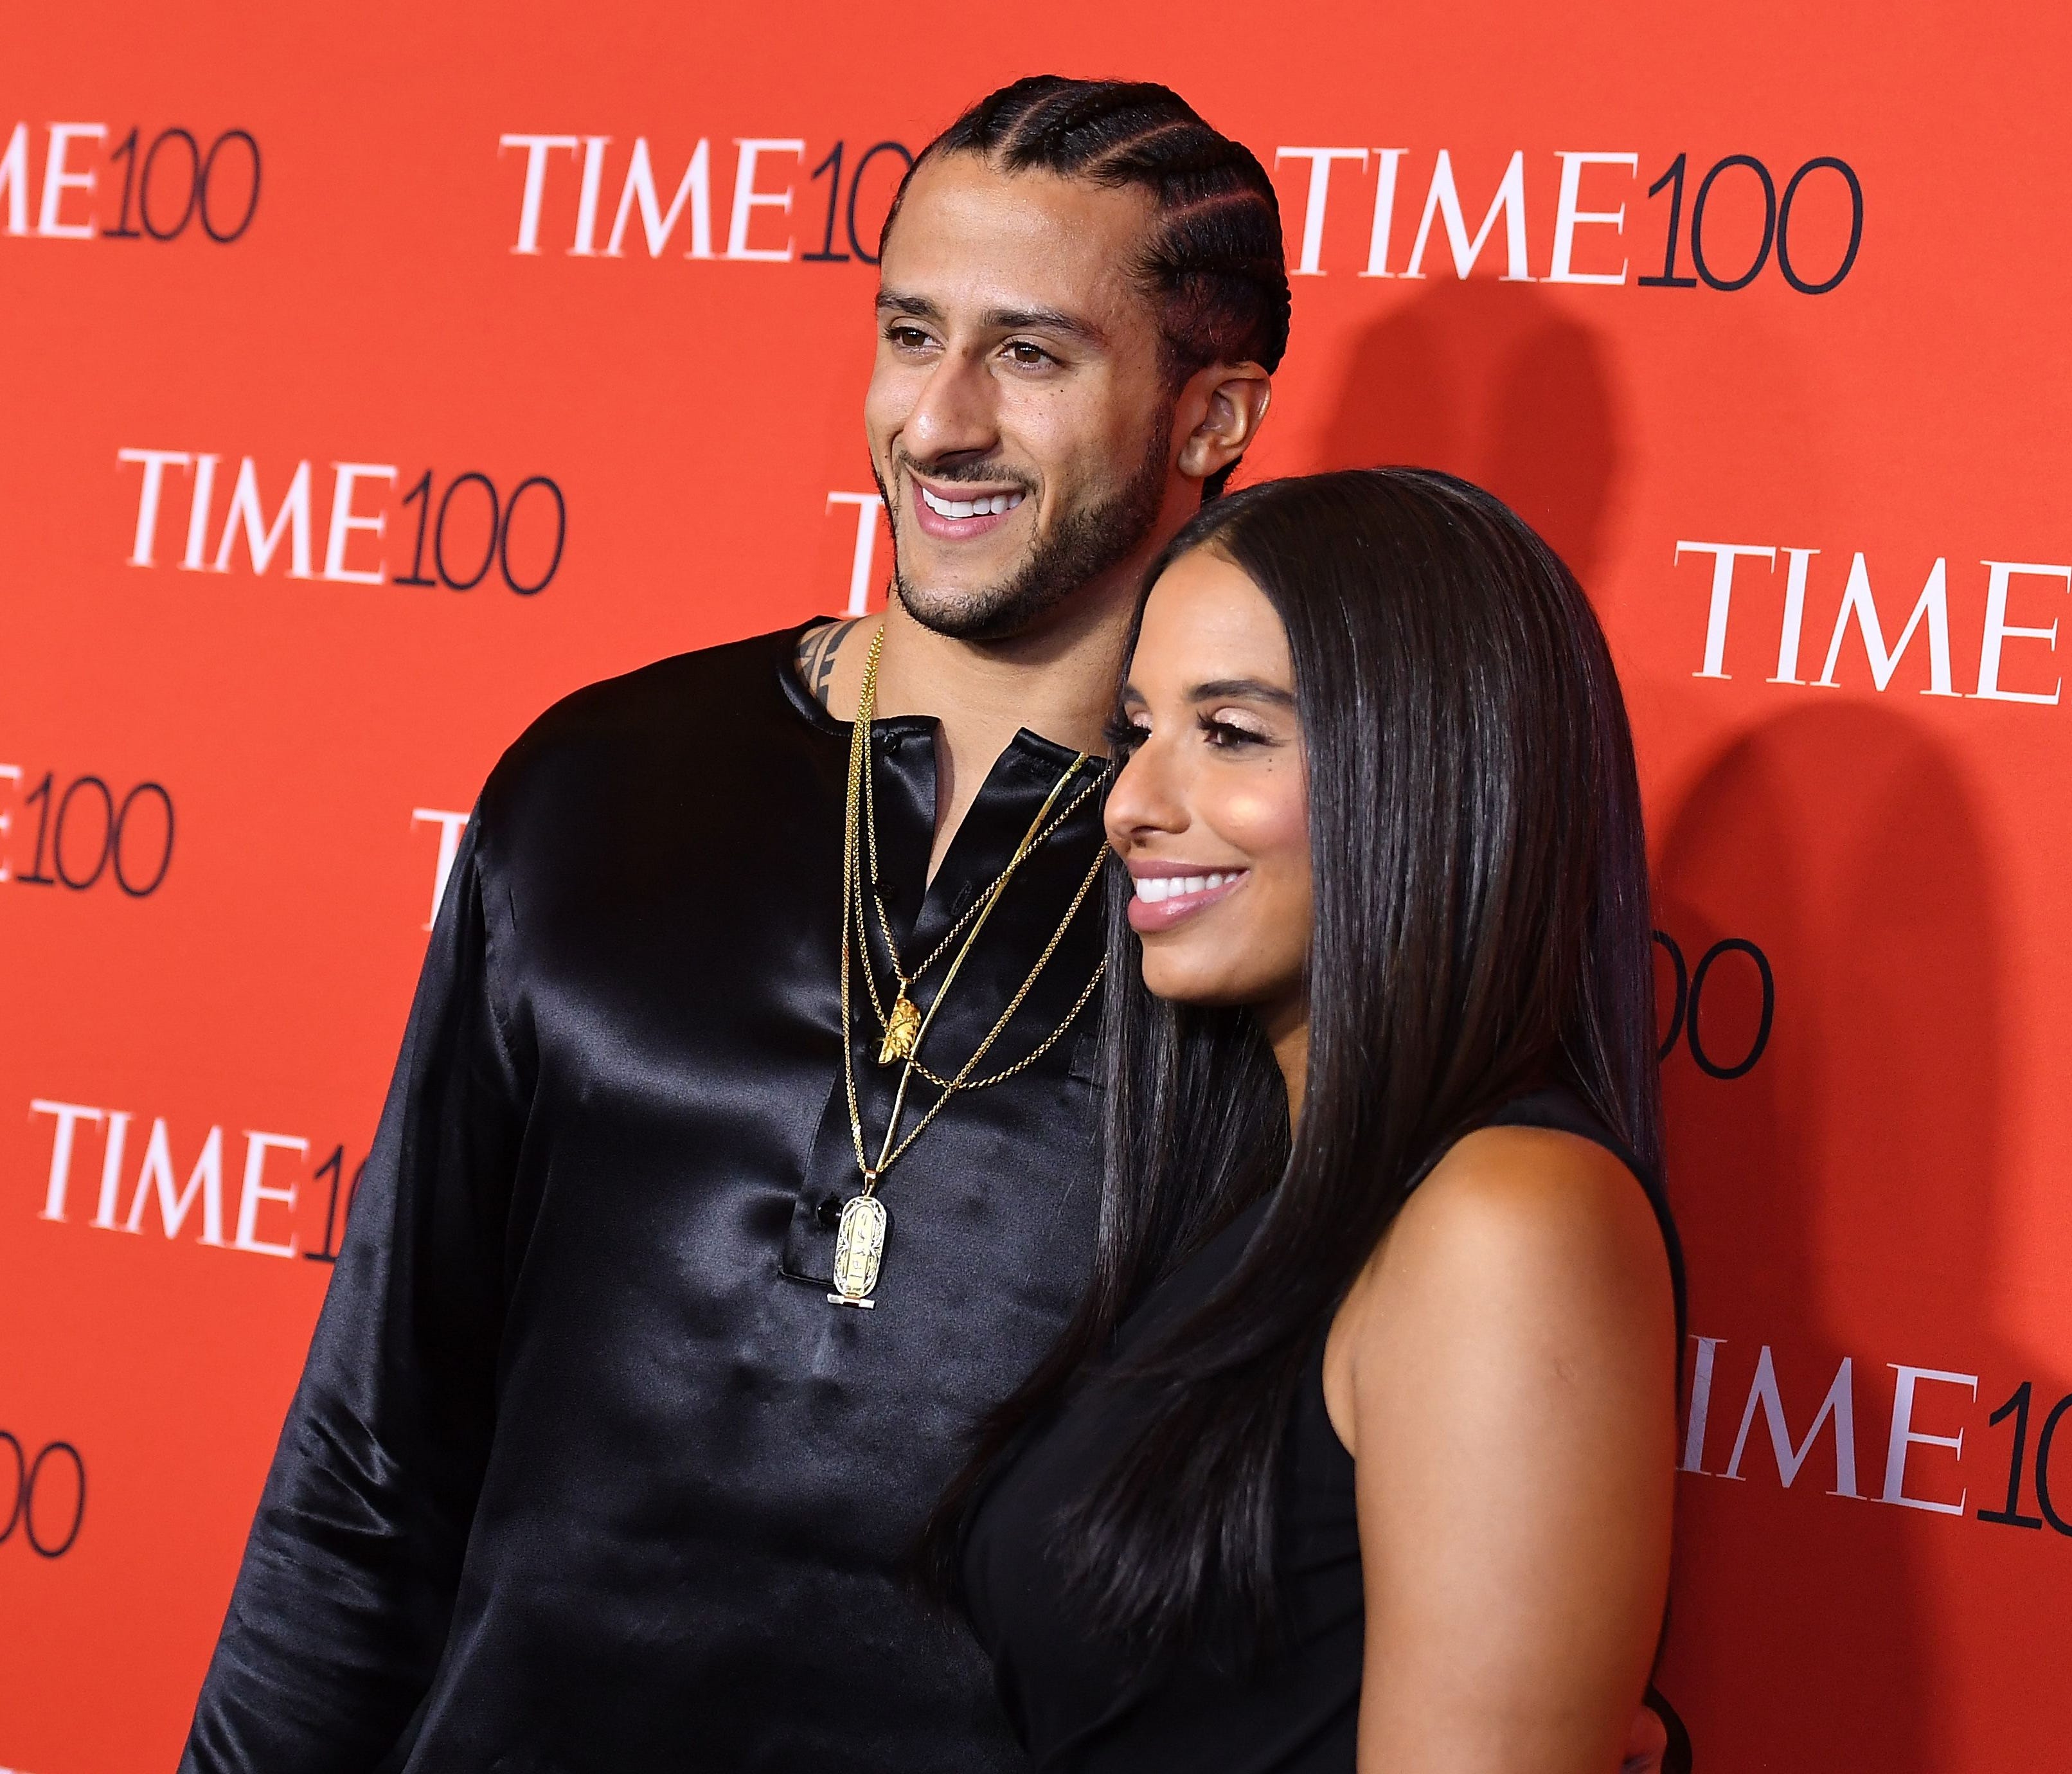 (FILES) This file photo taken on April 25, 2017 shows Colin Kaepernick (L) and Nessa attending the 2017 Time 100 Gala at Jazz at Lincoln Center in New York City.  Controversial quarterback Colin Kaepernick, who drew global attention last season for kn